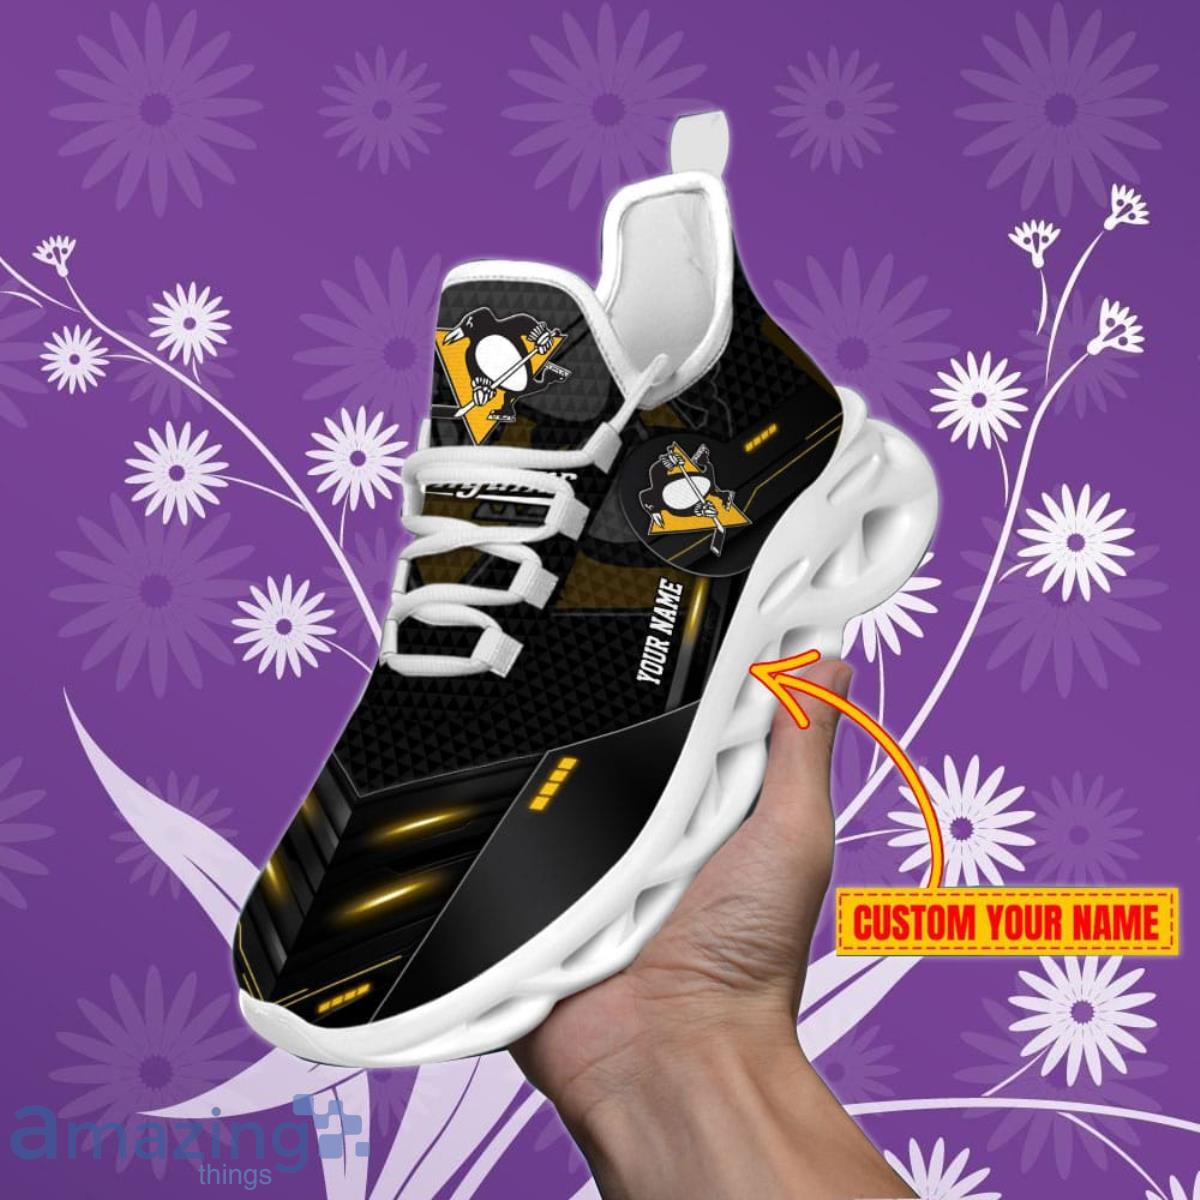 Penguin Personalized Sneakers Lightweight Walking Shoes Running Athletic  Casual Sneakers